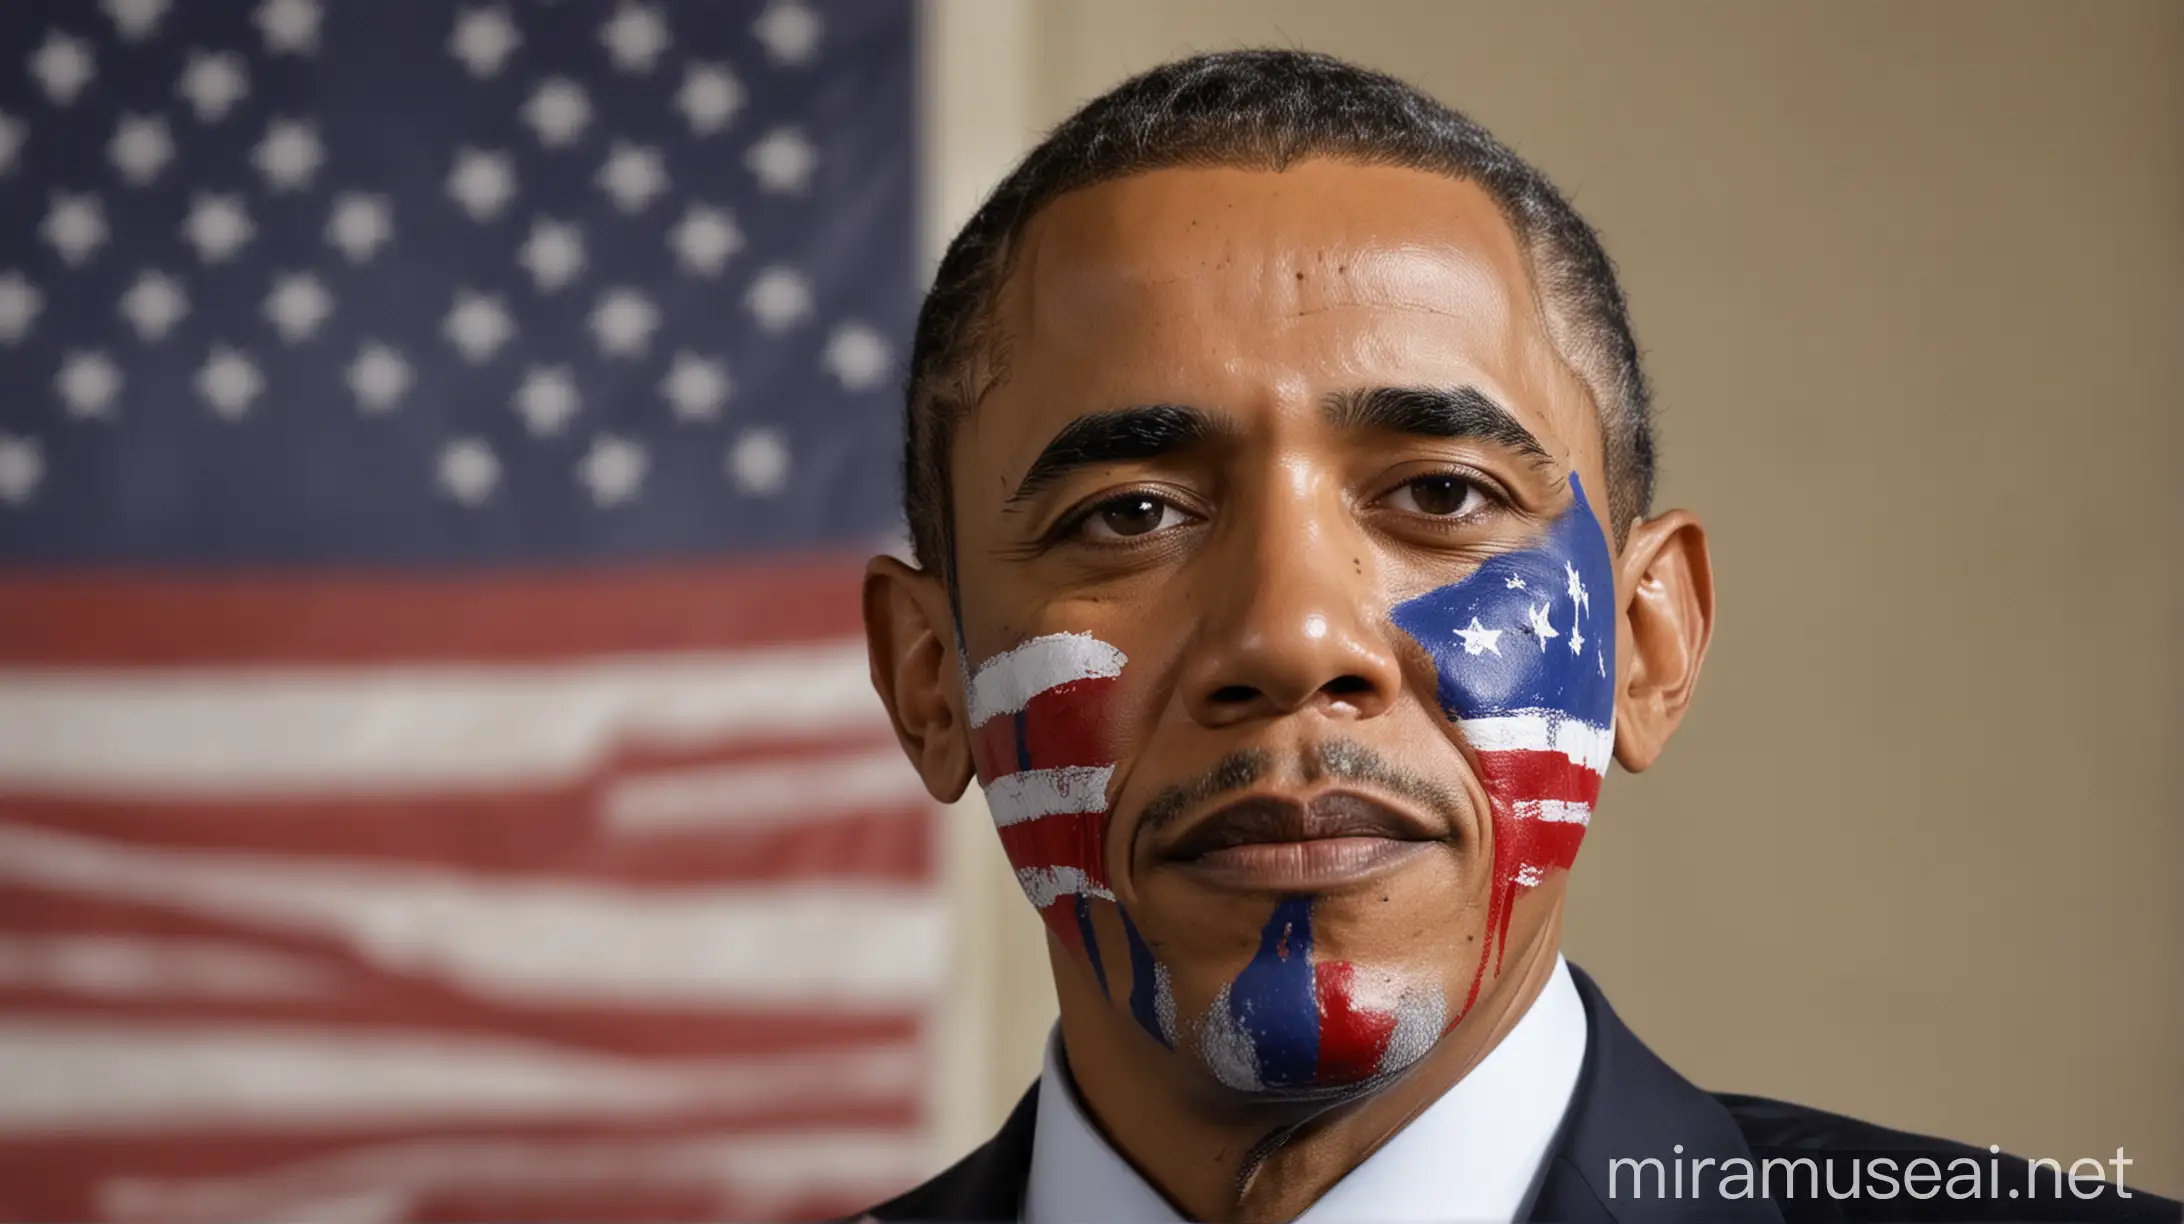 Obama standing with american flag painted on his whole face